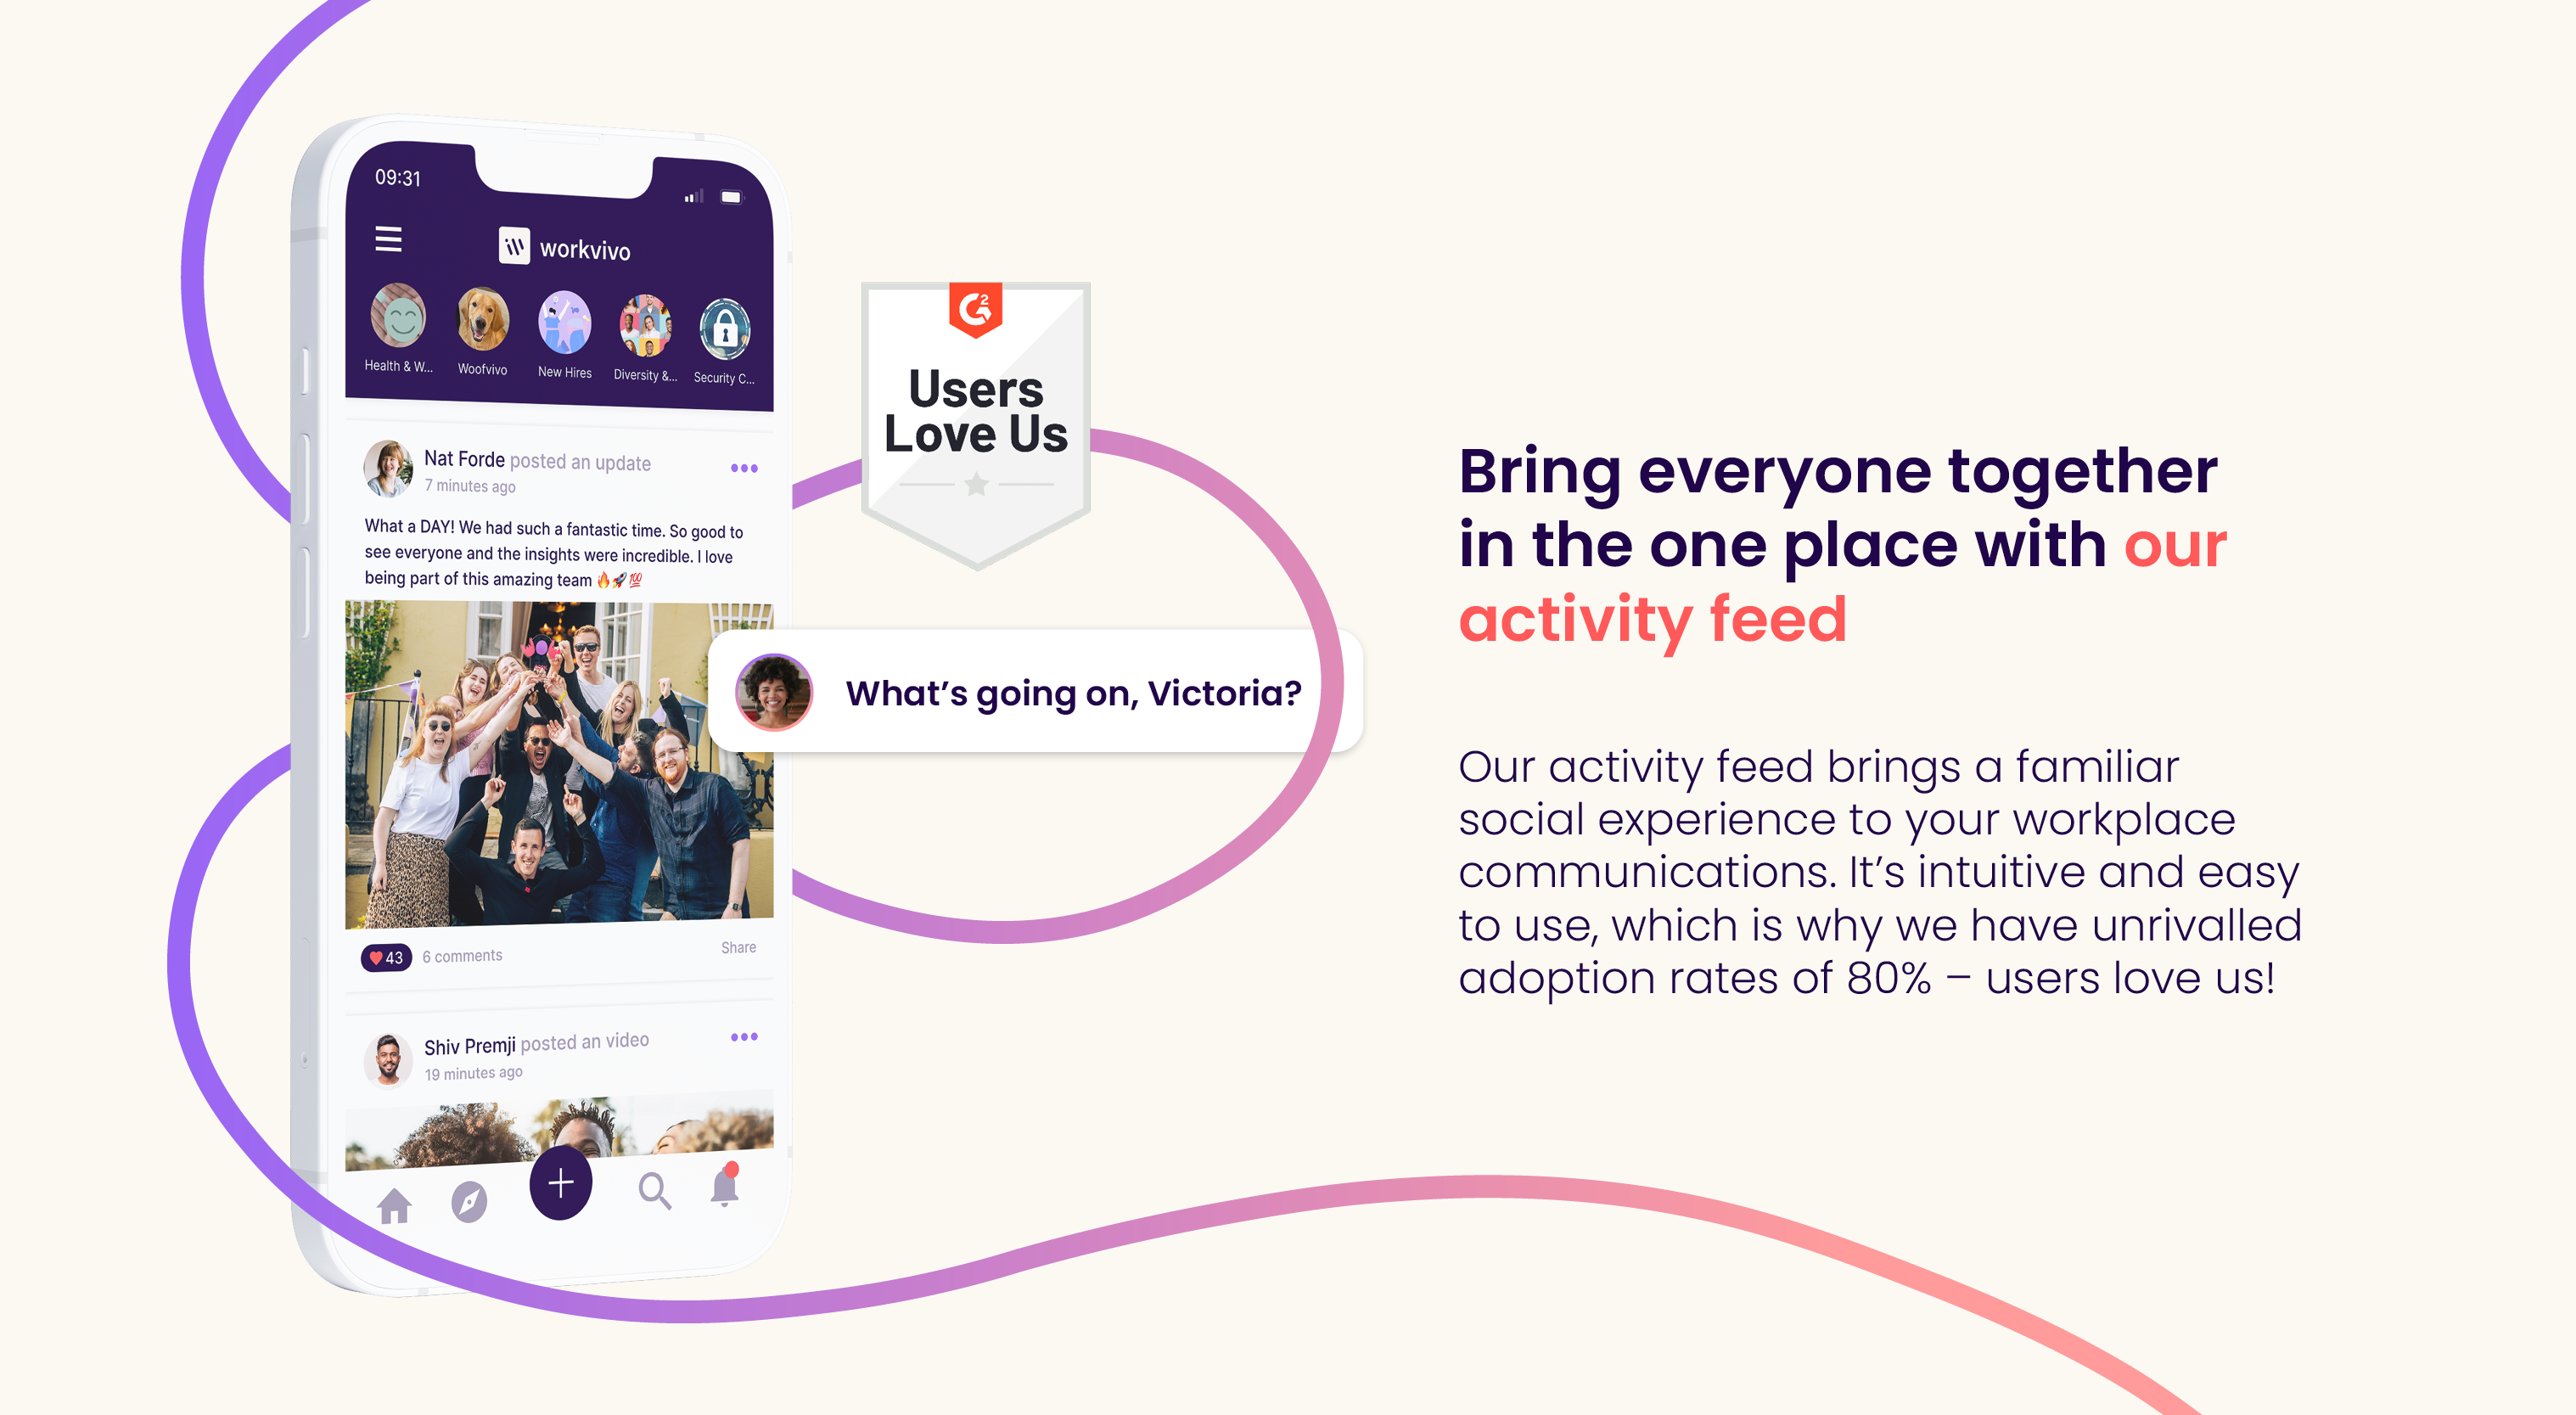 Bring everyone together in the one place with our activity feed